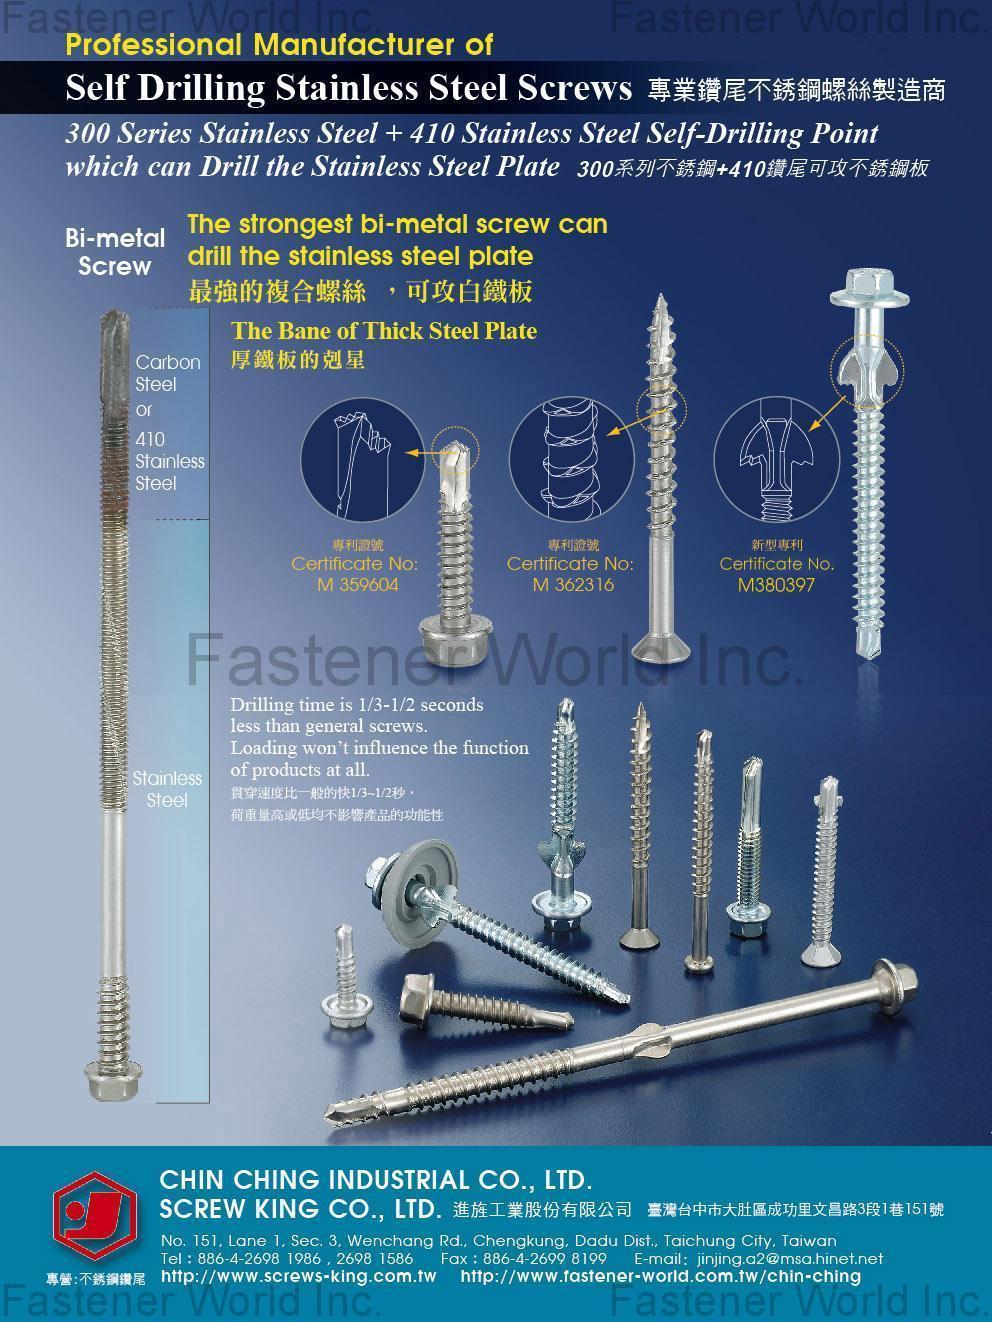 SCREW KING CO., LTD.  , Self Drilling Stainless Steel Screws, 300 Series Stainless Steel + 410 Stainless Steel Self-Drilling Point, Bi-Metal Screw , Bi-metal Screw